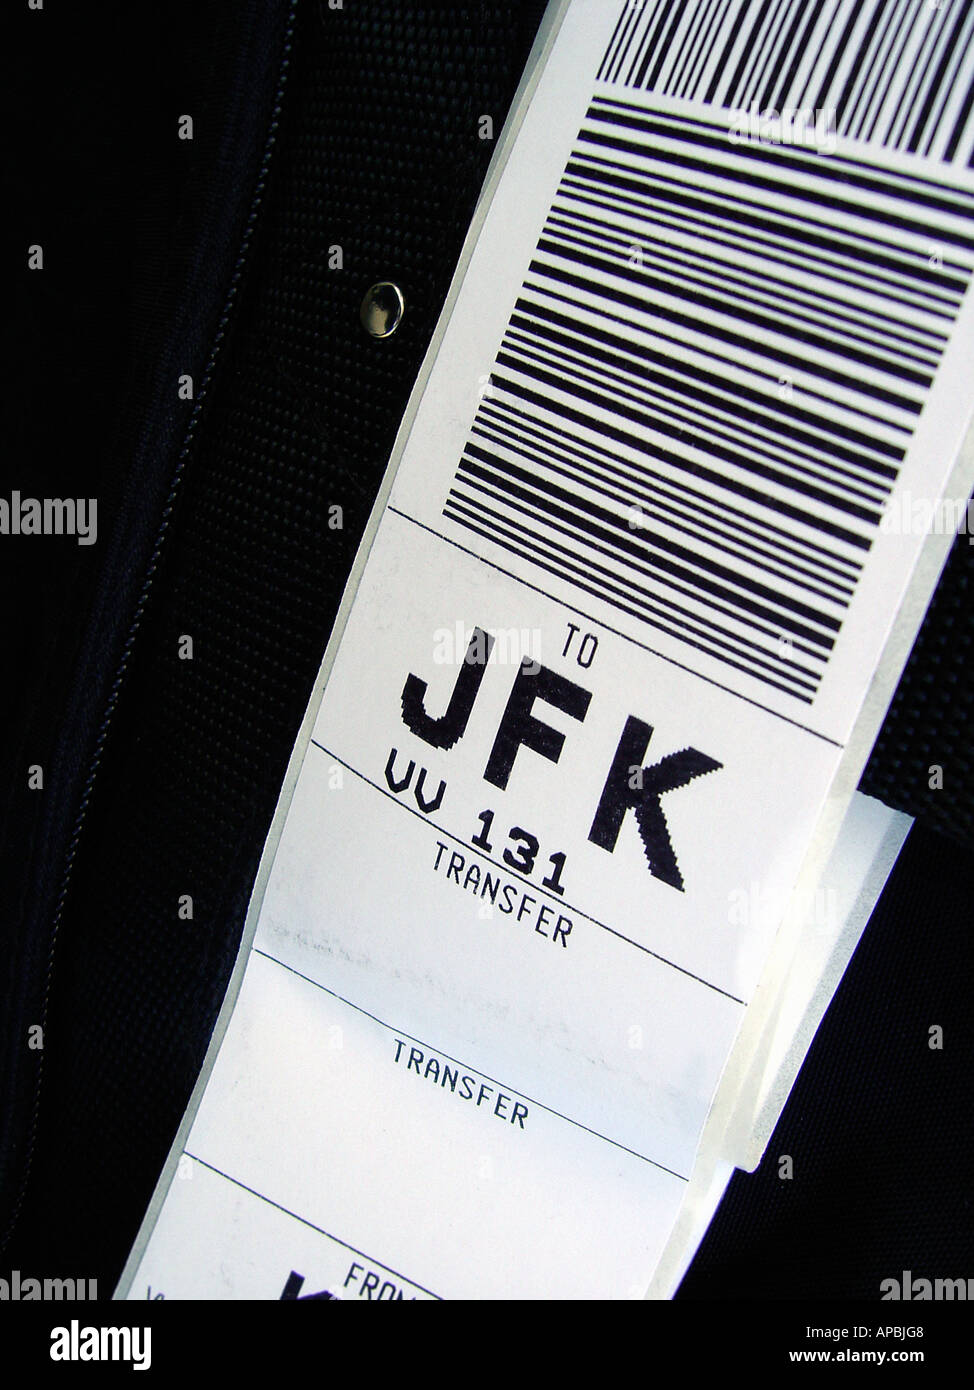 Closeup of a Luggage Tag enroute to John F Kennedy Airport in New York City Copy Space Stock Photo